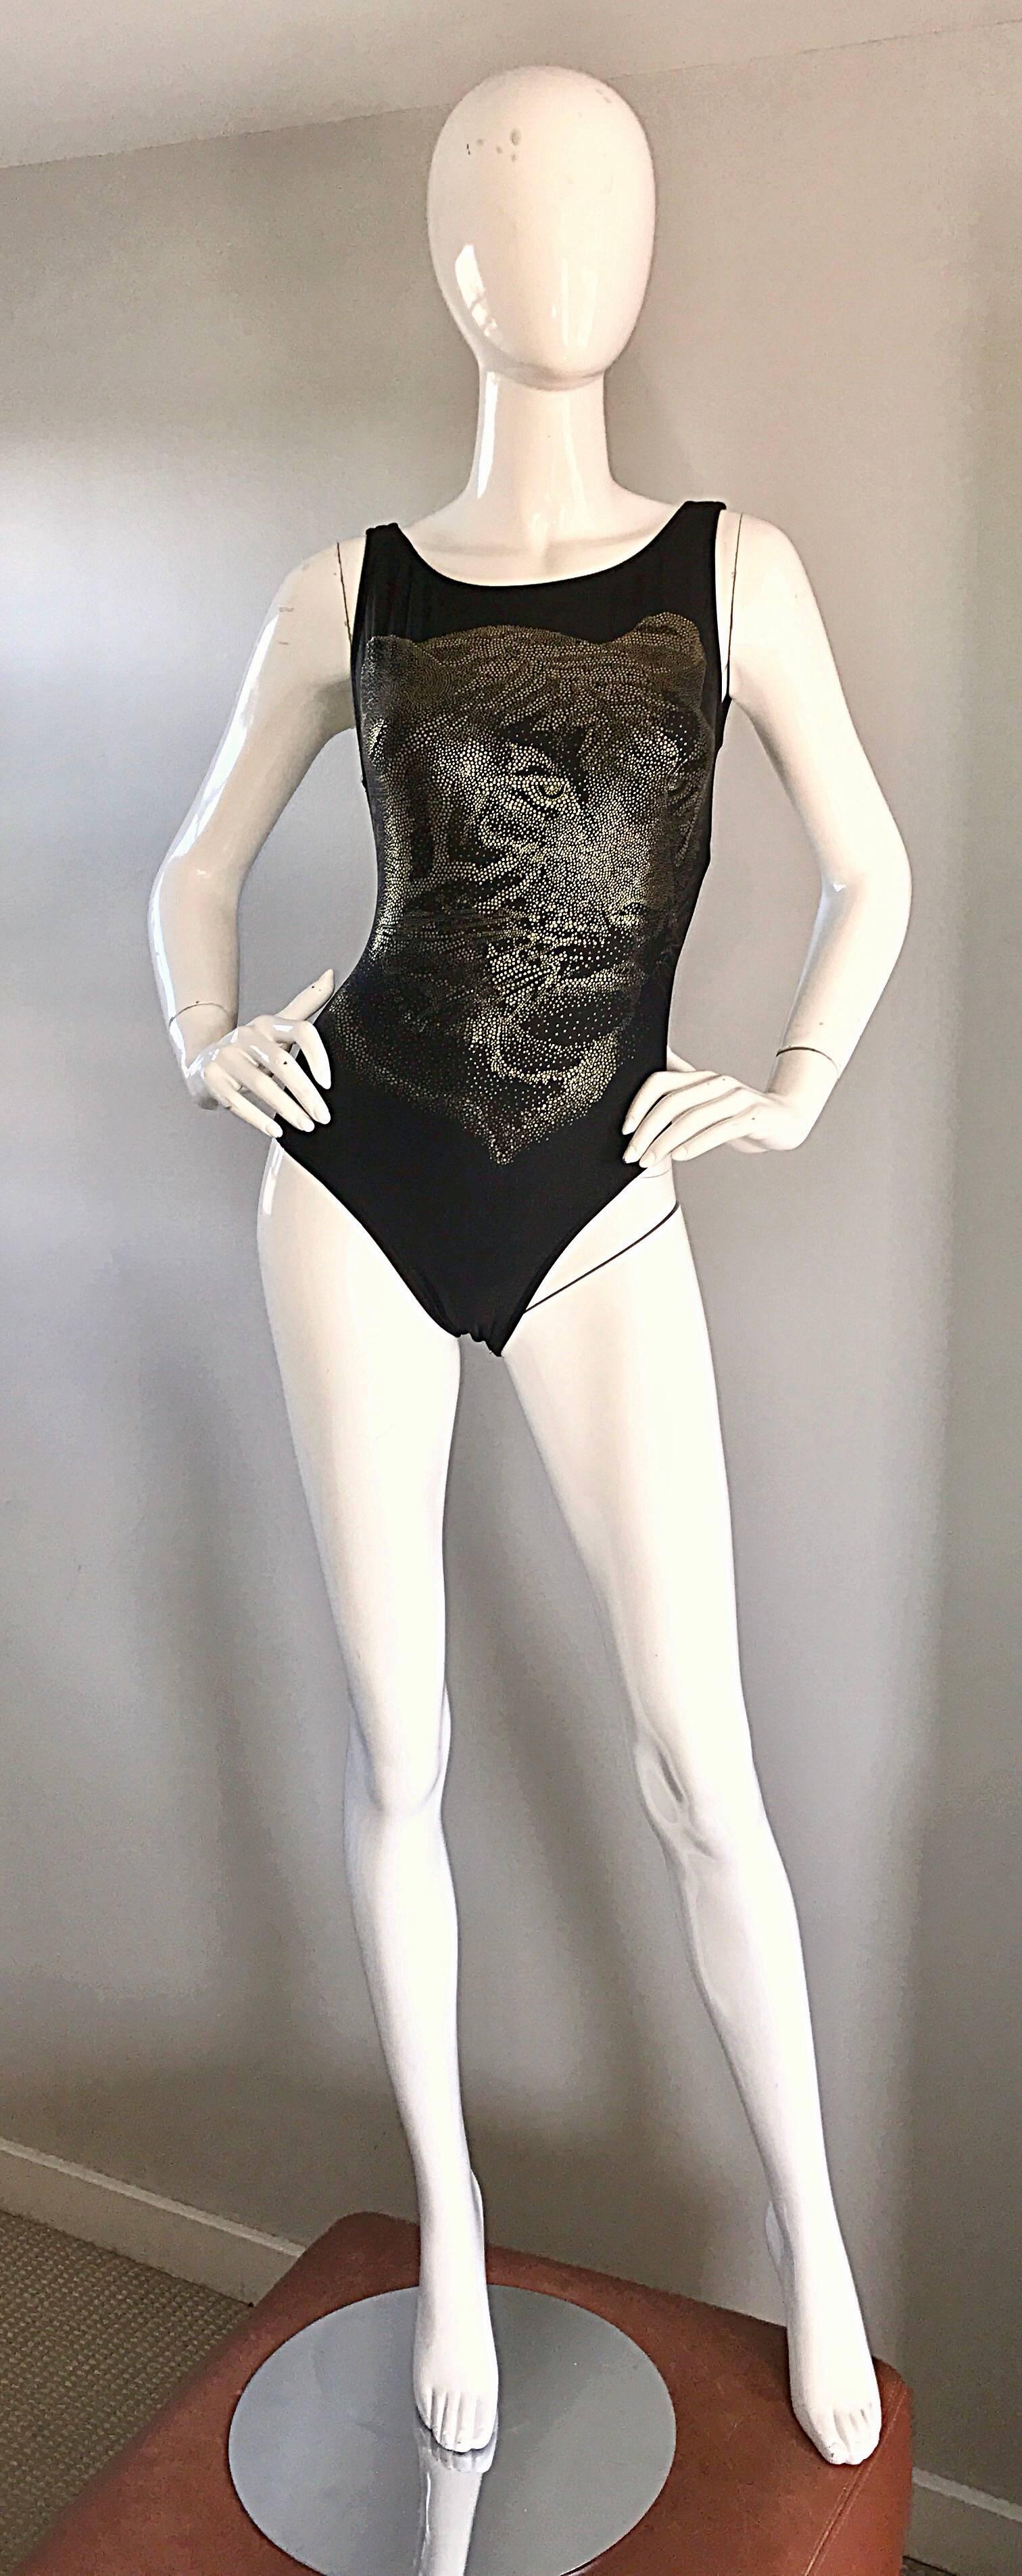 Rare vintage 1990s OSCAR DE LA RENTA three dimensional TIGER PRINT black and gold metallic one piece swimsuit, or bodysuit! Awesome print on a body hugging / bodycon stretch fit! Extremely flattering, with sewing techniques only a genius could